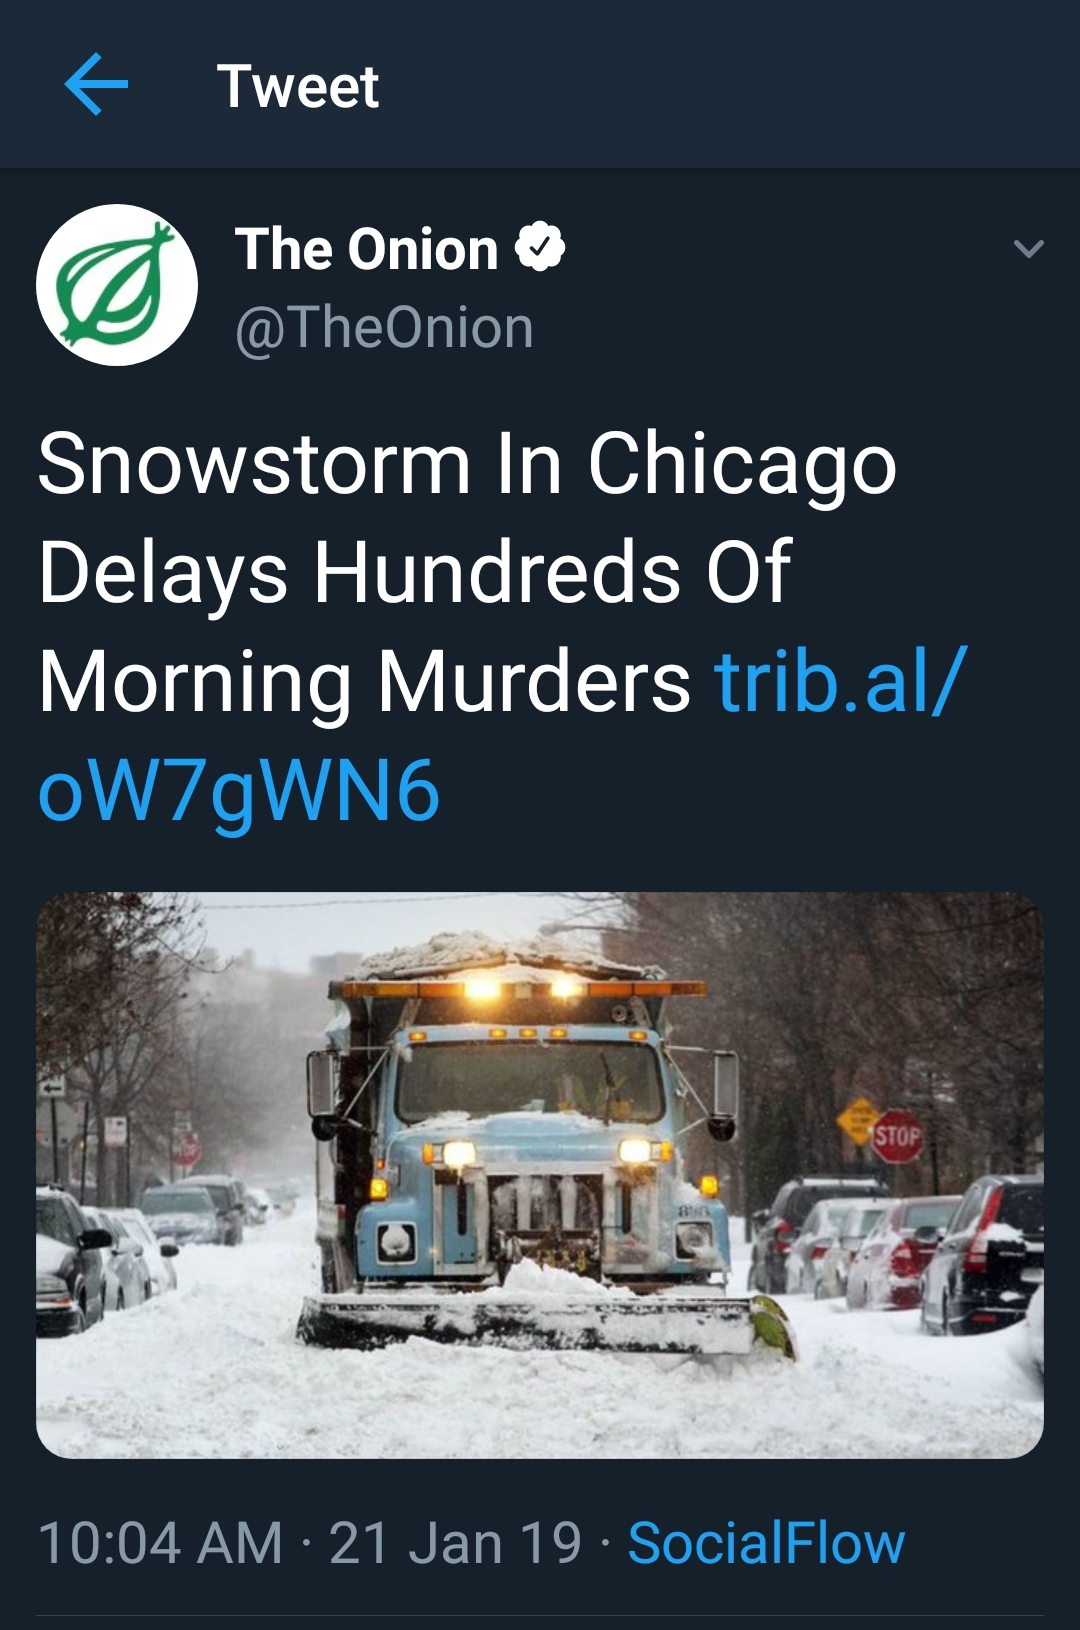 gallery - Tweet The Onion Snowstorm In Chicago Delays Hundreds of Morning Murders trib.al OW7gWN6 21 Jan 19. SocialFlow